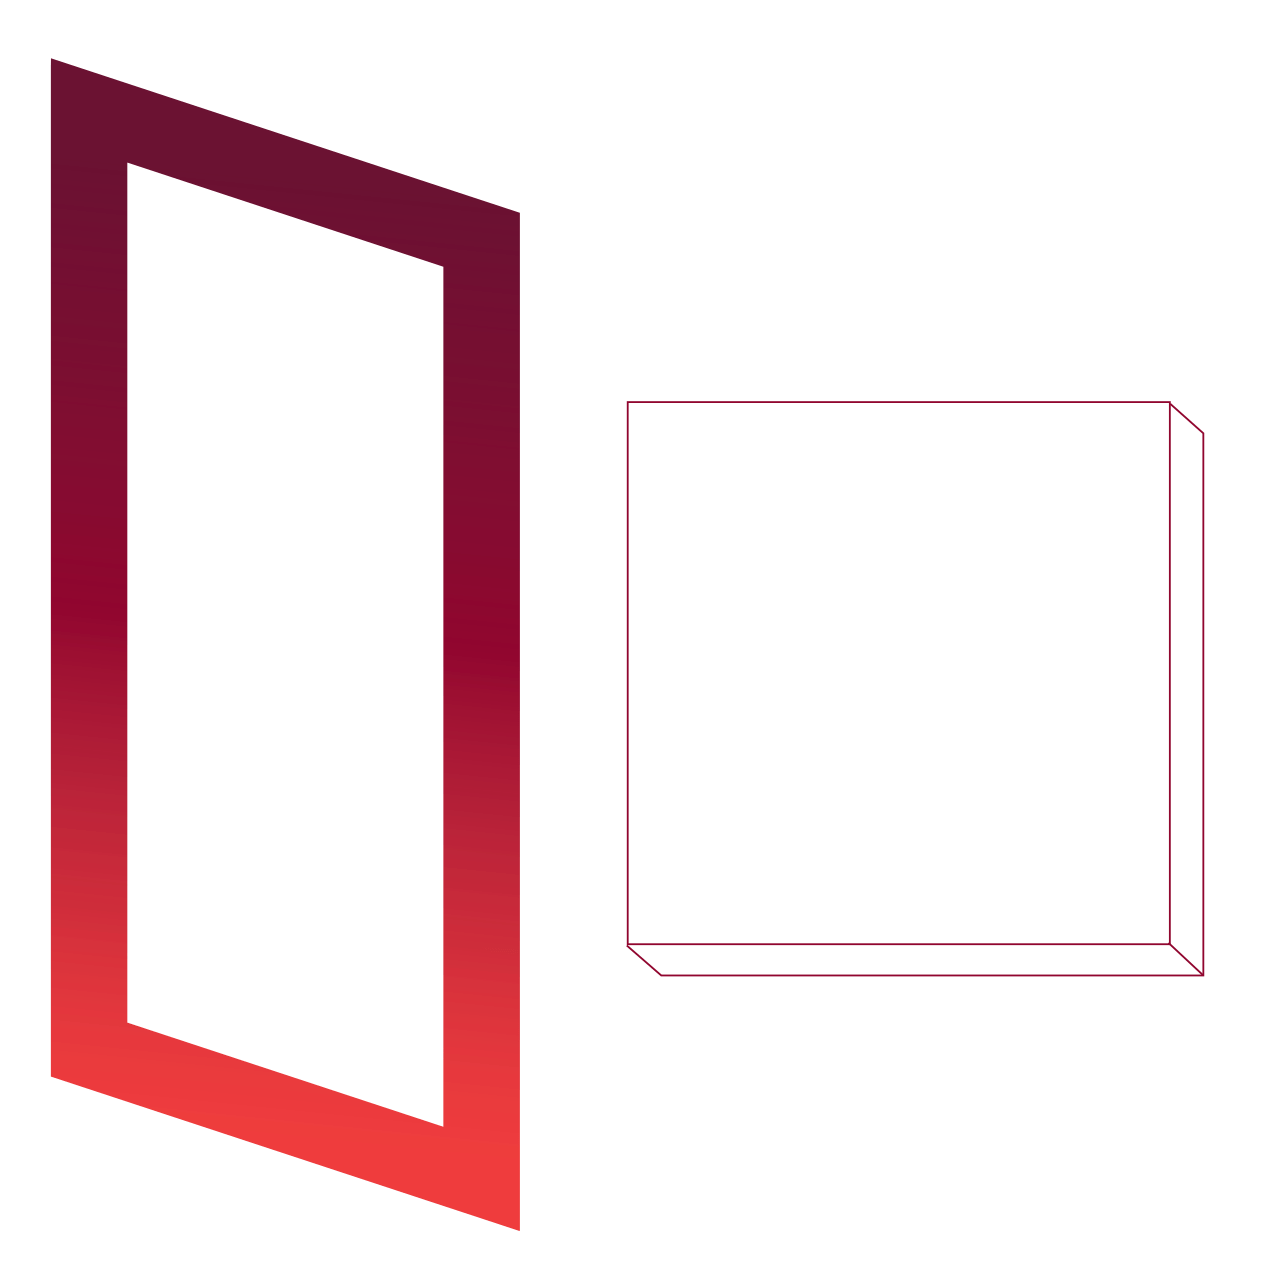 Two shapes. On the left, a white parallelogram with a thick maroon to red gradient border. On the right, a flattened white cube with red edges as seen from above.